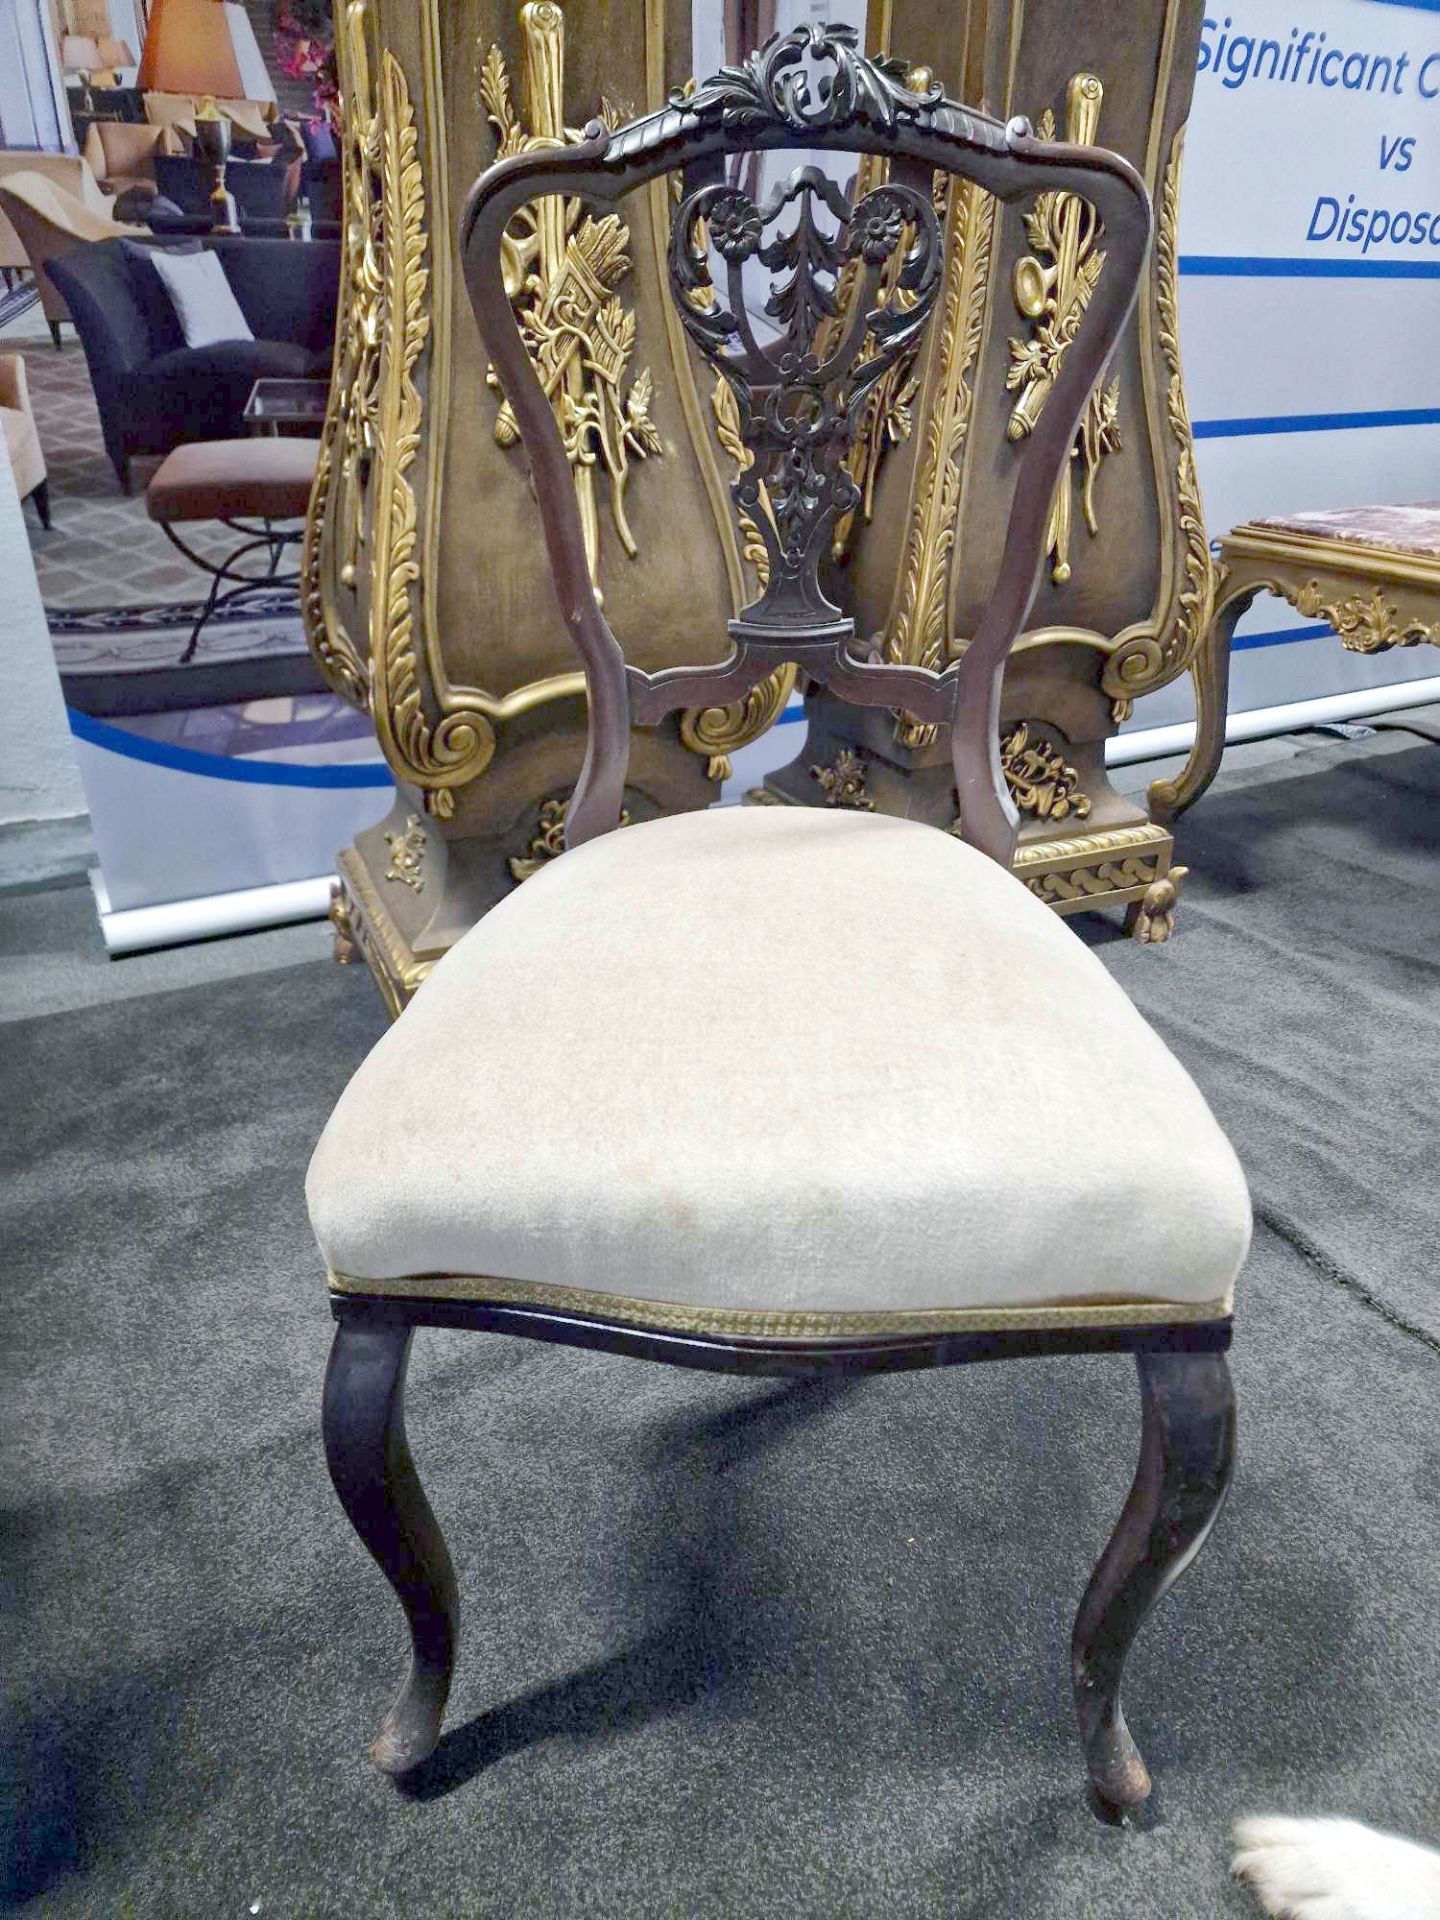 An Elegant Set of 4 Victorian Dining Chairs Elaborately Carved Top Rail And Shield Backs The Seats - Image 7 of 17